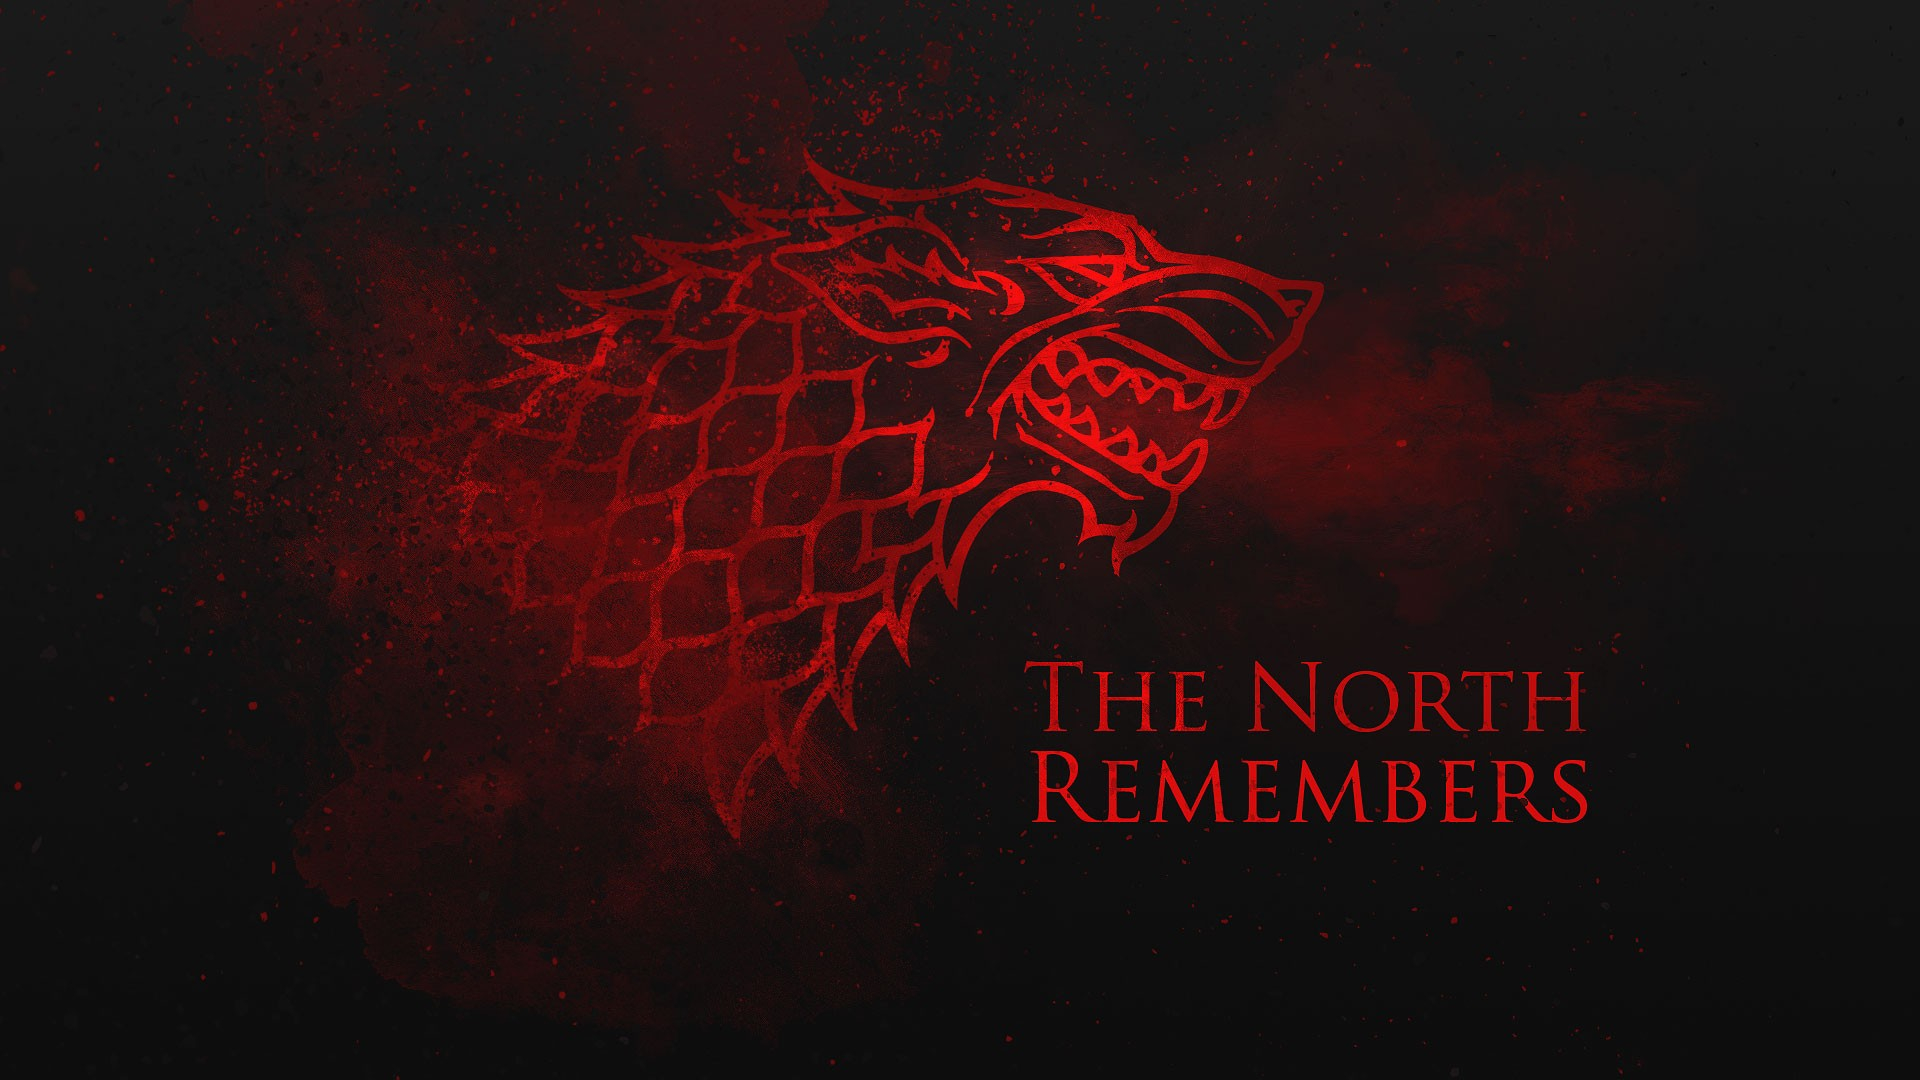 1920x1080 The North Remembers Wallpaper Awesome Free HD Wallpapers